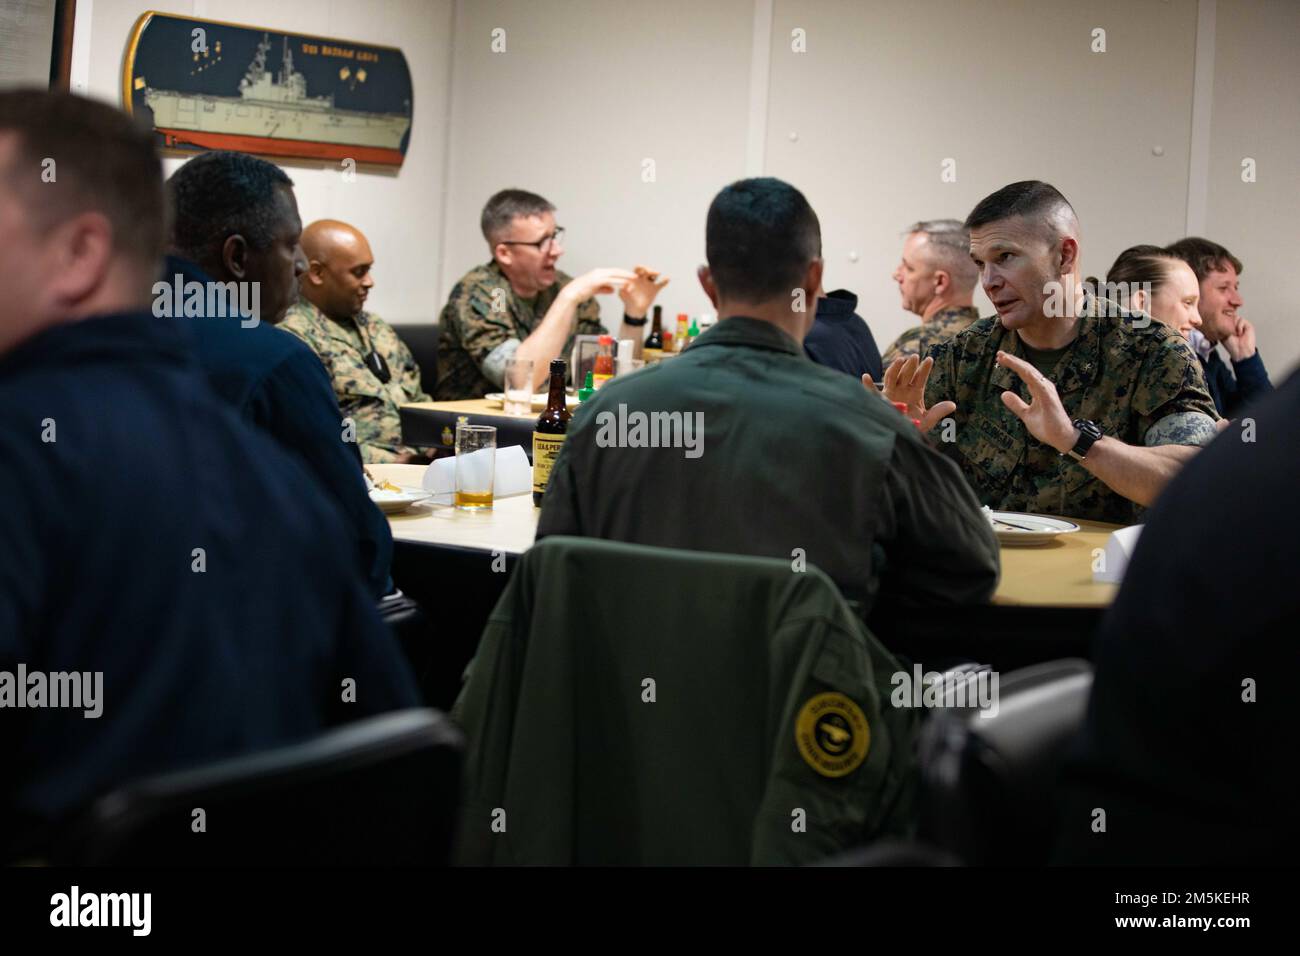 220322-N-LZ839-1499  NORFOLK, VA. (March 22, 2022) - Brig. Gen. Mark H. Clingan, Assistant Deputy Commandant, Combat Development and Integration, eats lunch with Capt. Joseph Murphy the commanding officer of the amphibious assault ship USS Bataan (LHD 5) during a tour of Bataan,  March 22, 2022. Bataan is homeported at Naval Station Norfolk. Stock Photo